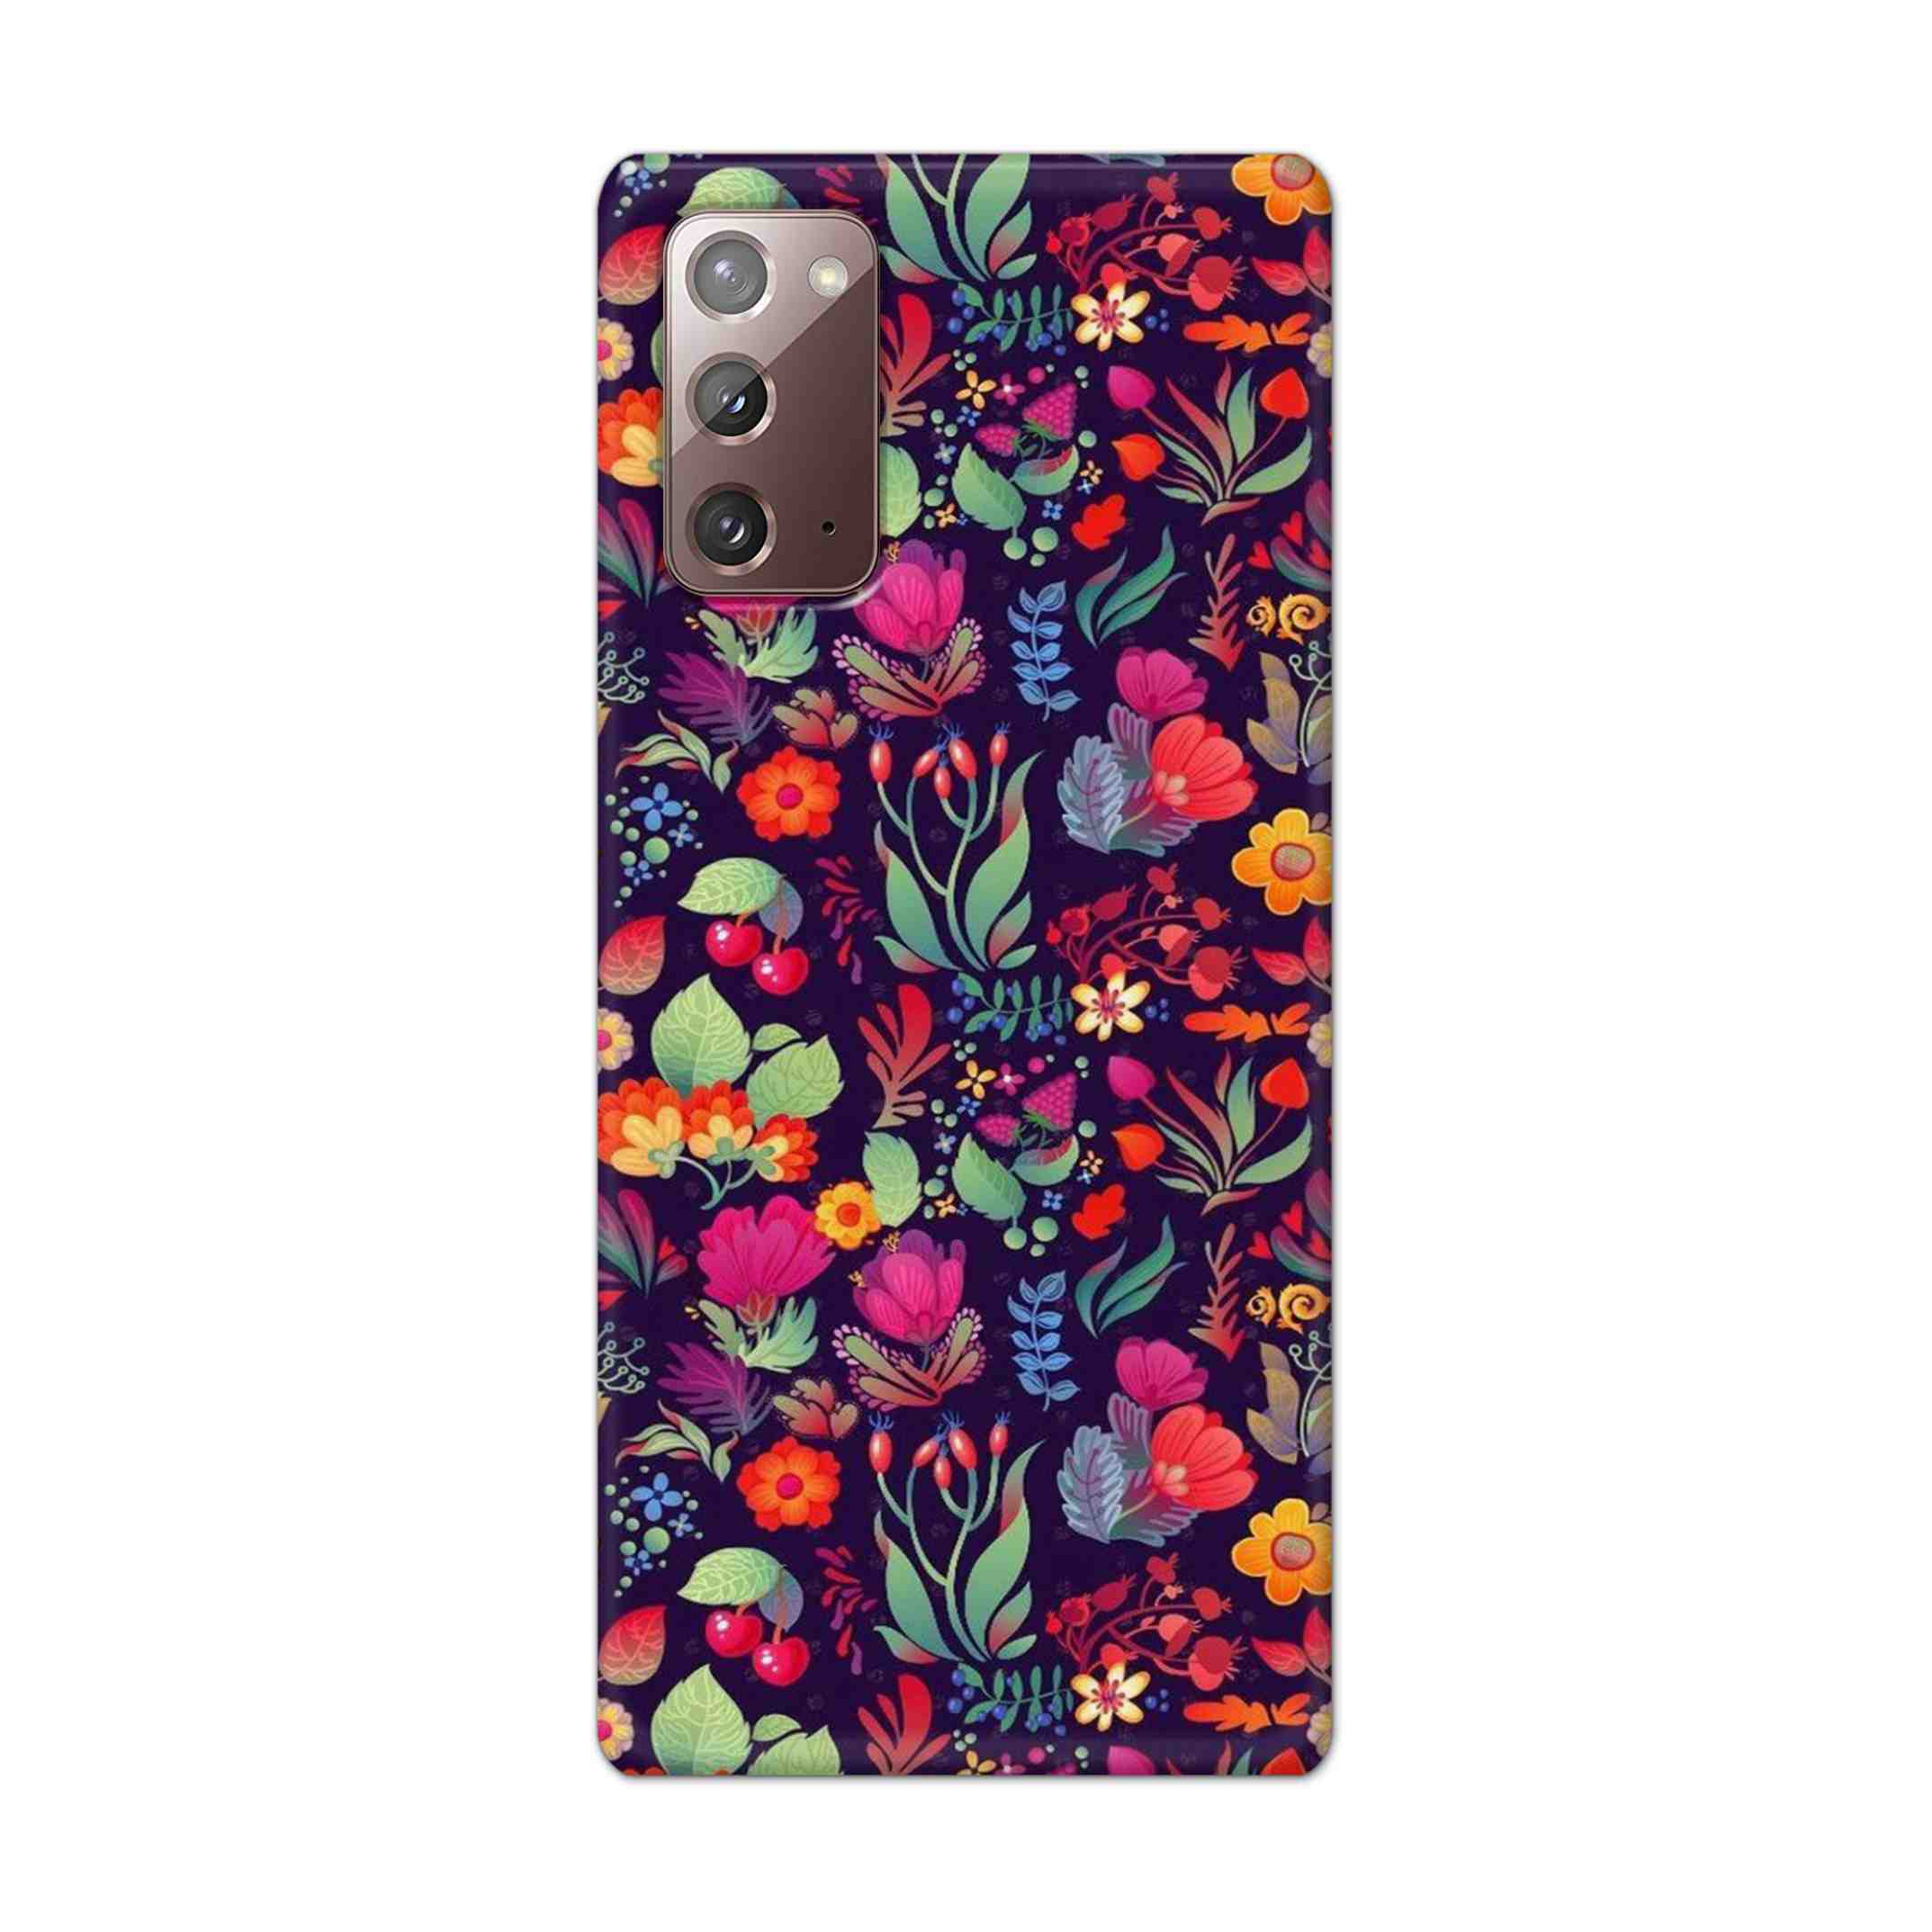 Buy Fruits Flower Hard Back Mobile Phone Case Cover For Samsung Galaxy Note 20 Online